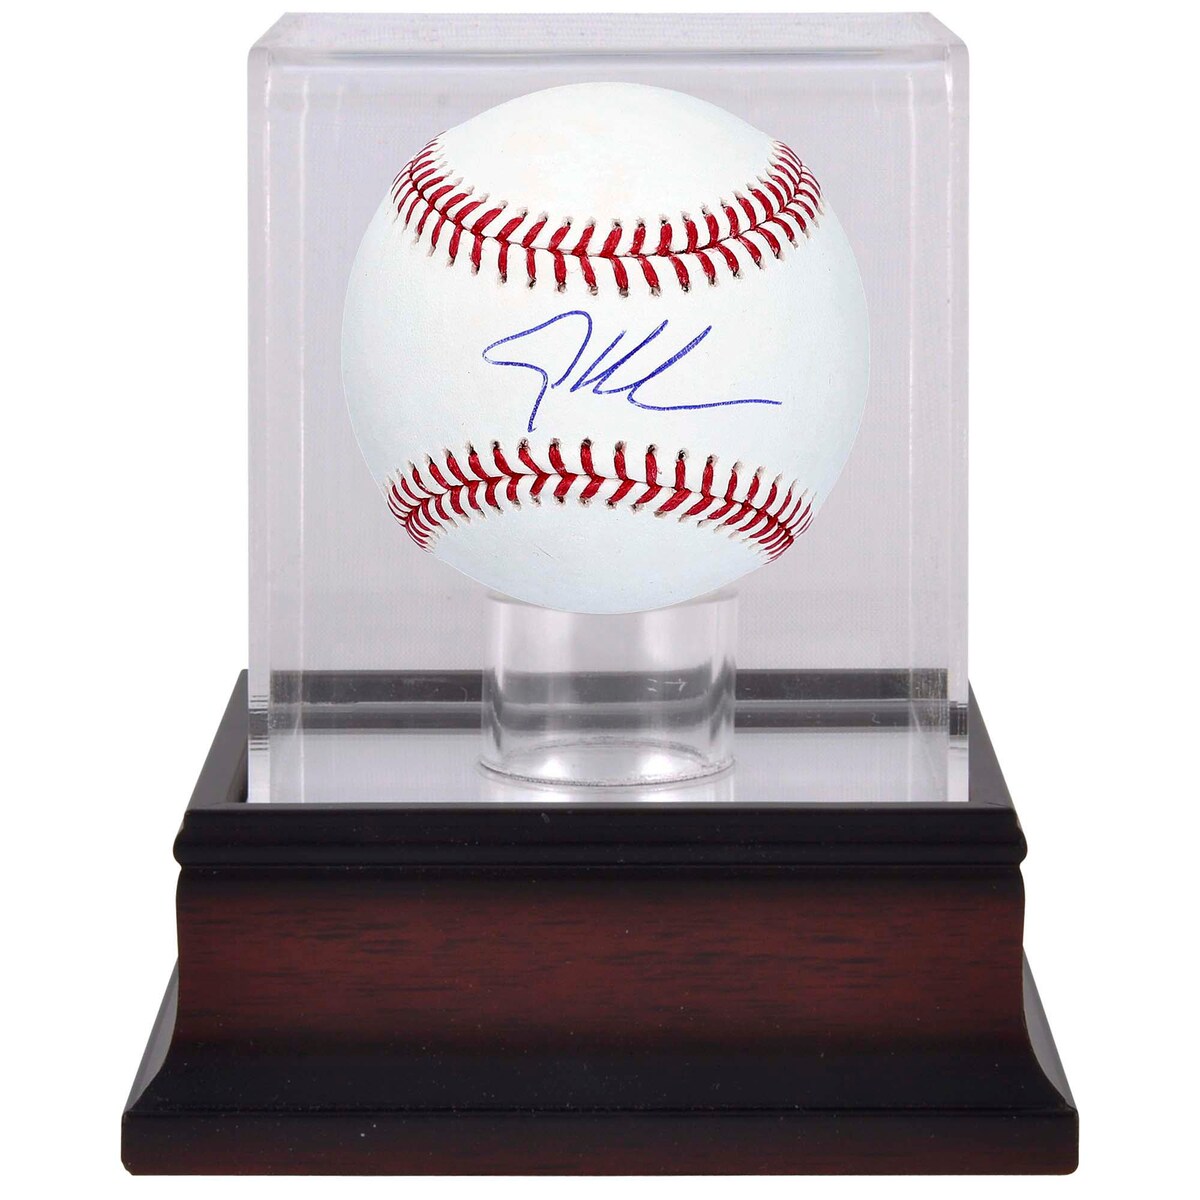 Autographed by Adley Rutschman, this Baseball & Mahogany Baseball Display Case is ready to boost your Baltimore Orioles memorabilia. Featuring an official team design, this baseball is an essential keepsake for any Baltimore Orioles fan. It showcases Adley Rutschman's distinct signature on the ball to provide a noteworthy piece to your collection.Officially licensedObtained under the auspices of the Major League Baseball Authentication Program and can be verified by its numbered hologram at MLB.comSignature may varyHand-signed autographBrand: Fanatics AuthenticIncludes an individually numbered, tamper-evident hologram